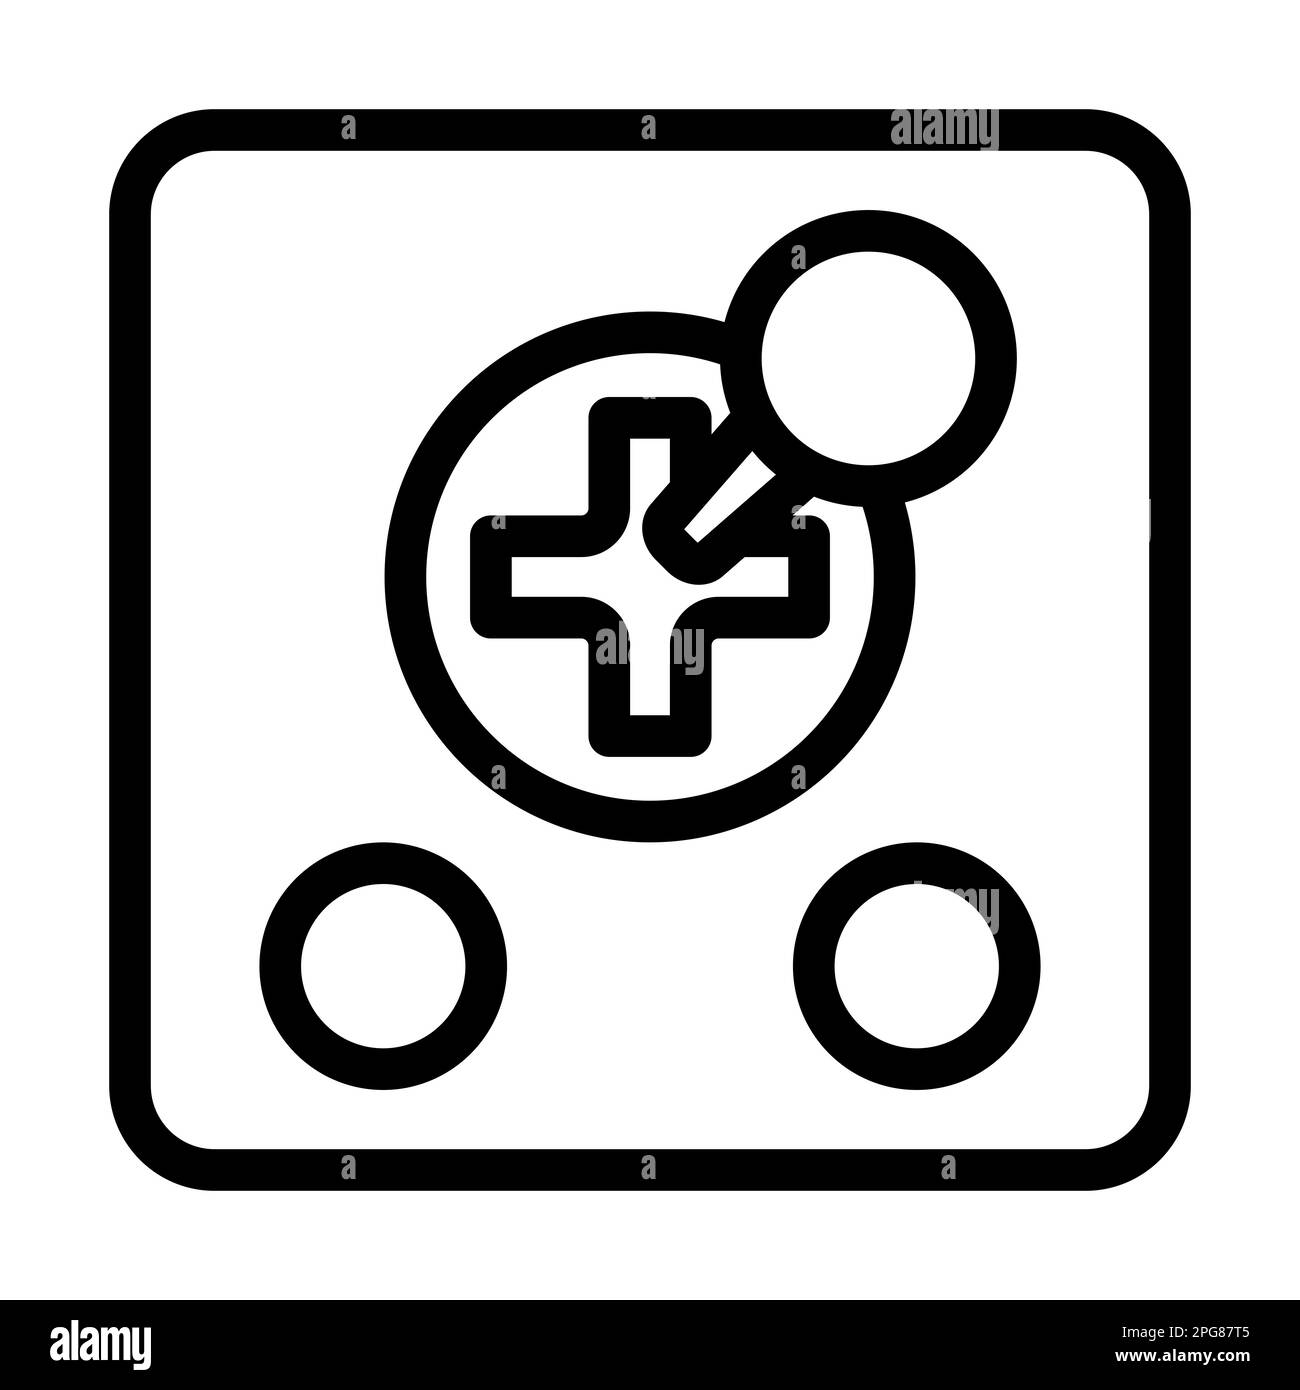 Joystick Vector Thick Line Icon For Personal And Commercial Use. Stock Photo